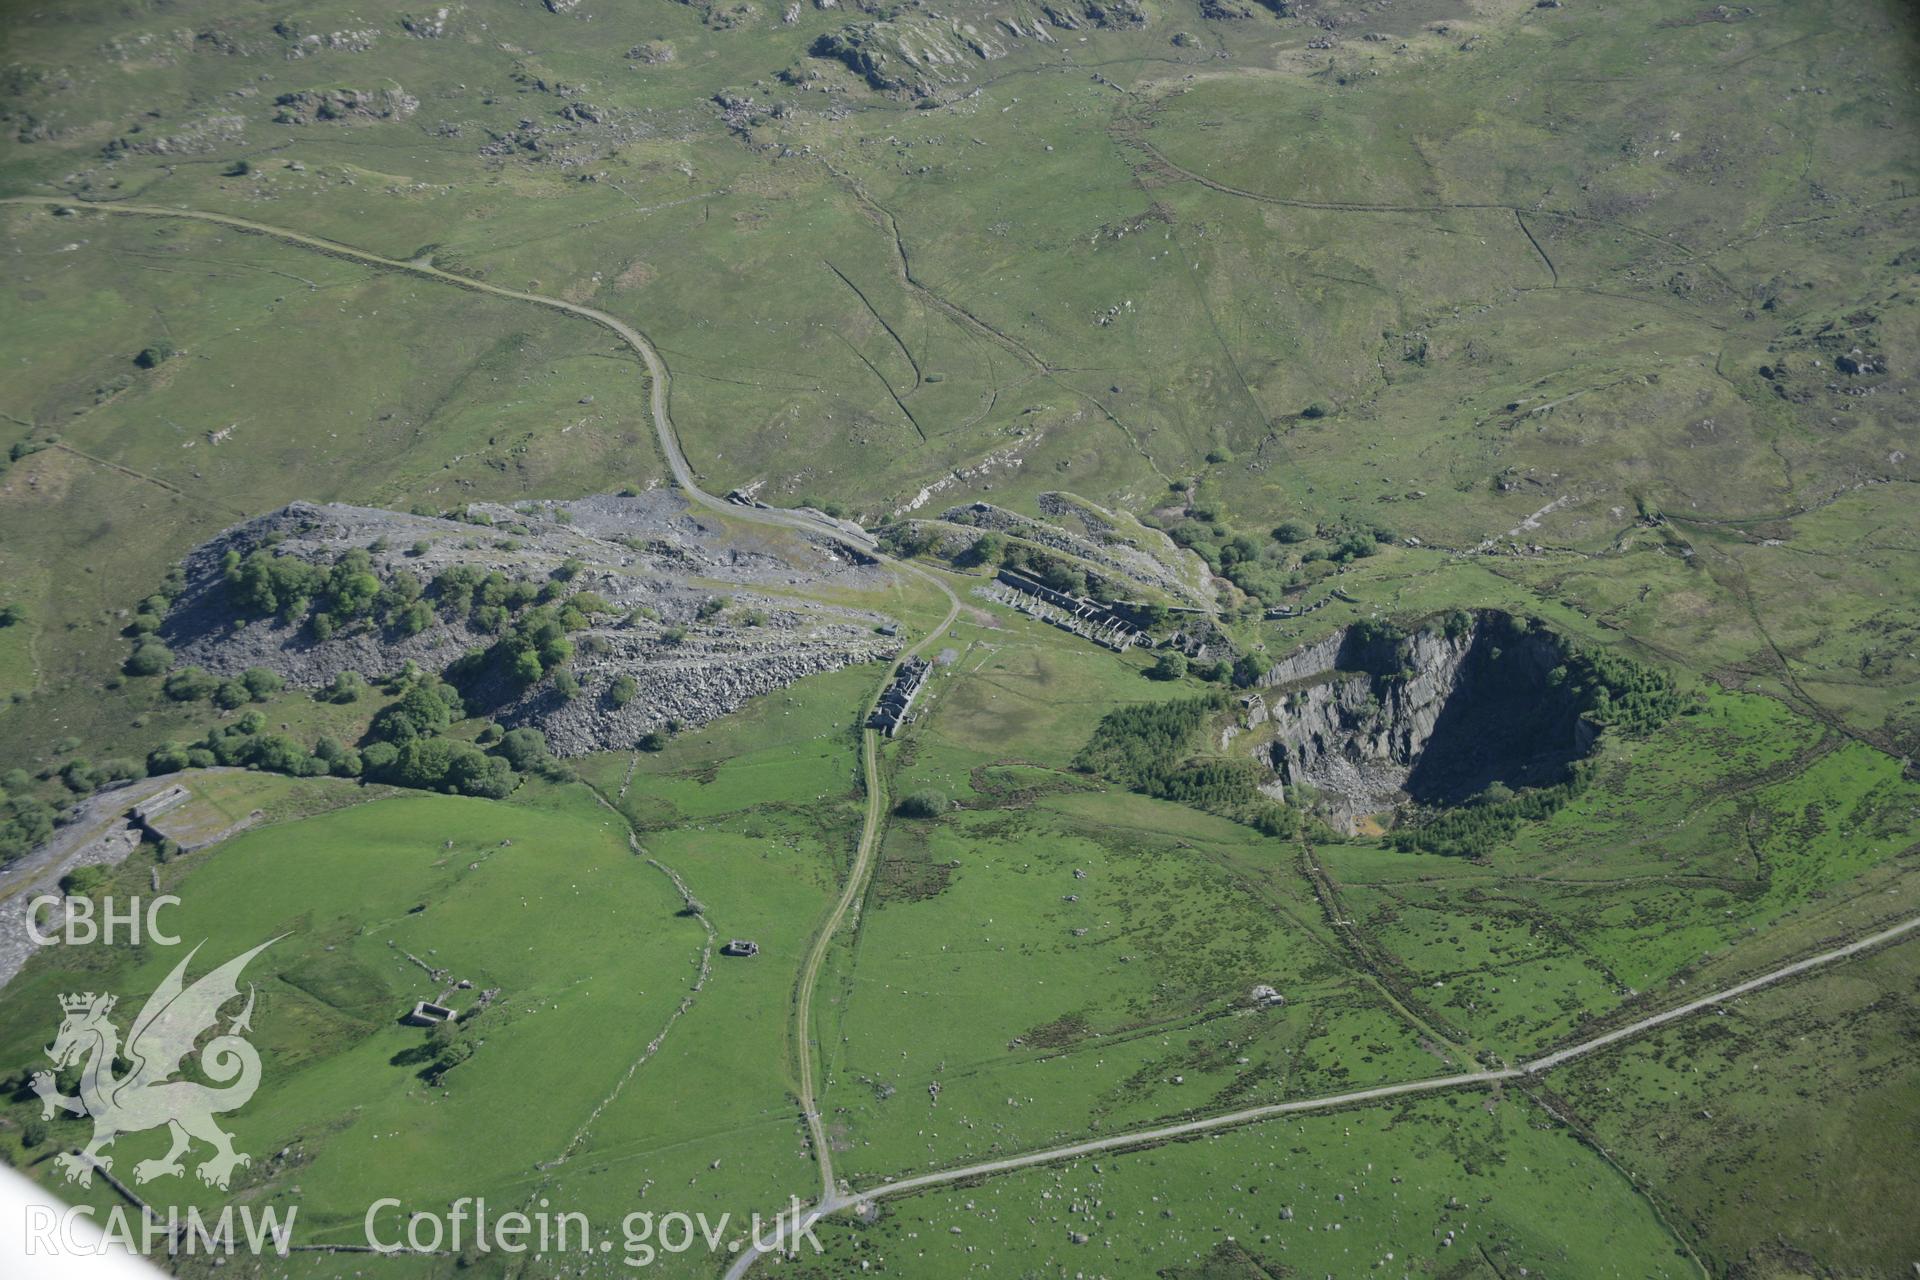 RCAHMW digital colour oblique photograph of Rhos Quarry, Capel Curig, from the north. Taken on 08/06/2005 by T.G. Driver.